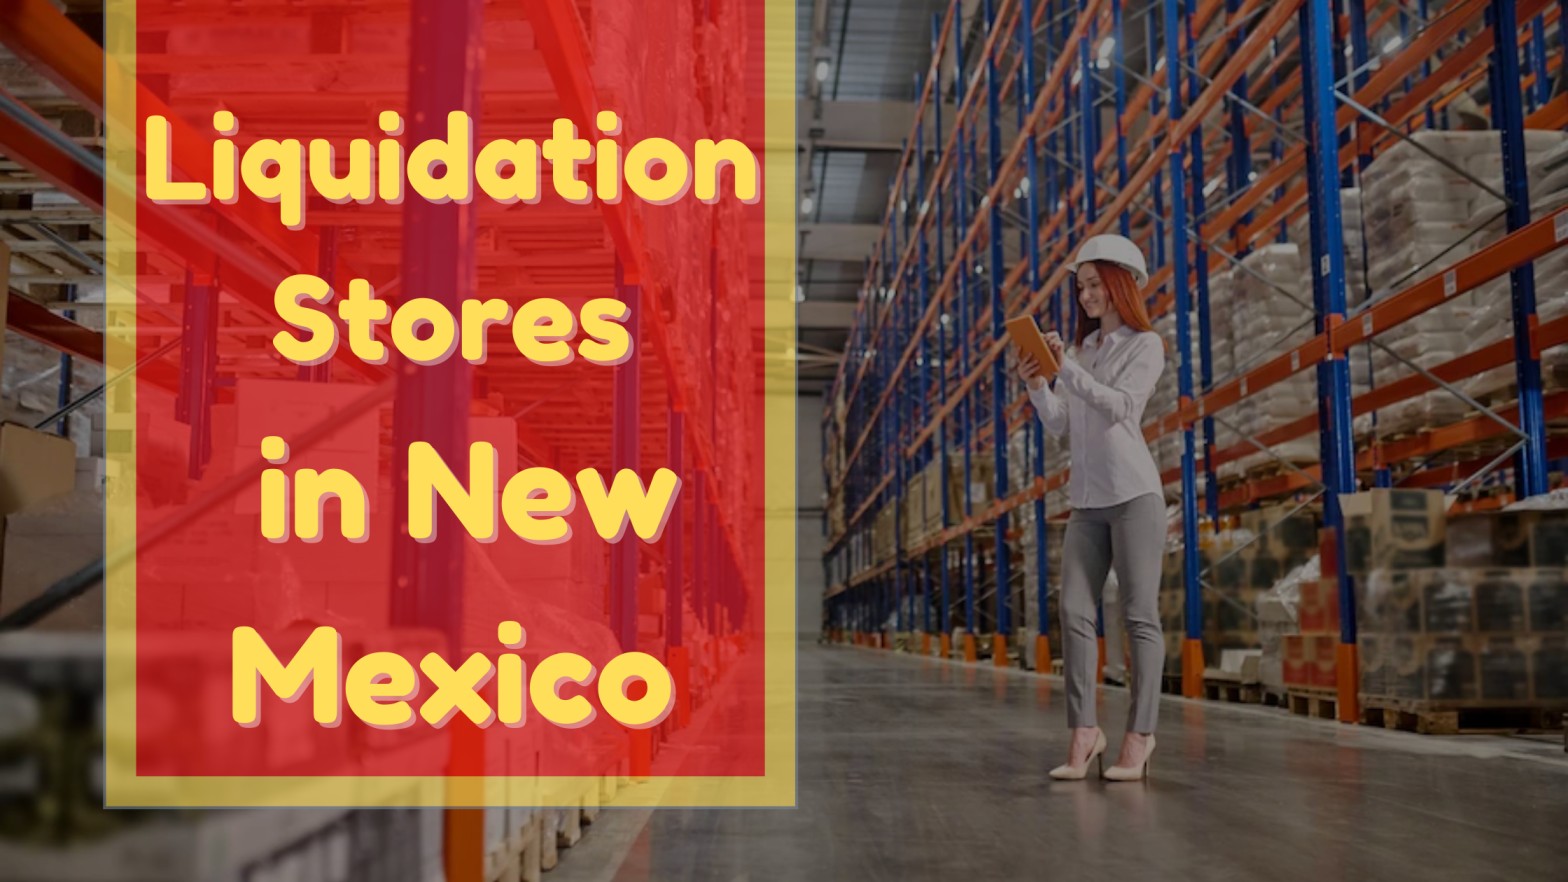 Liquidation Stores in New Mexico